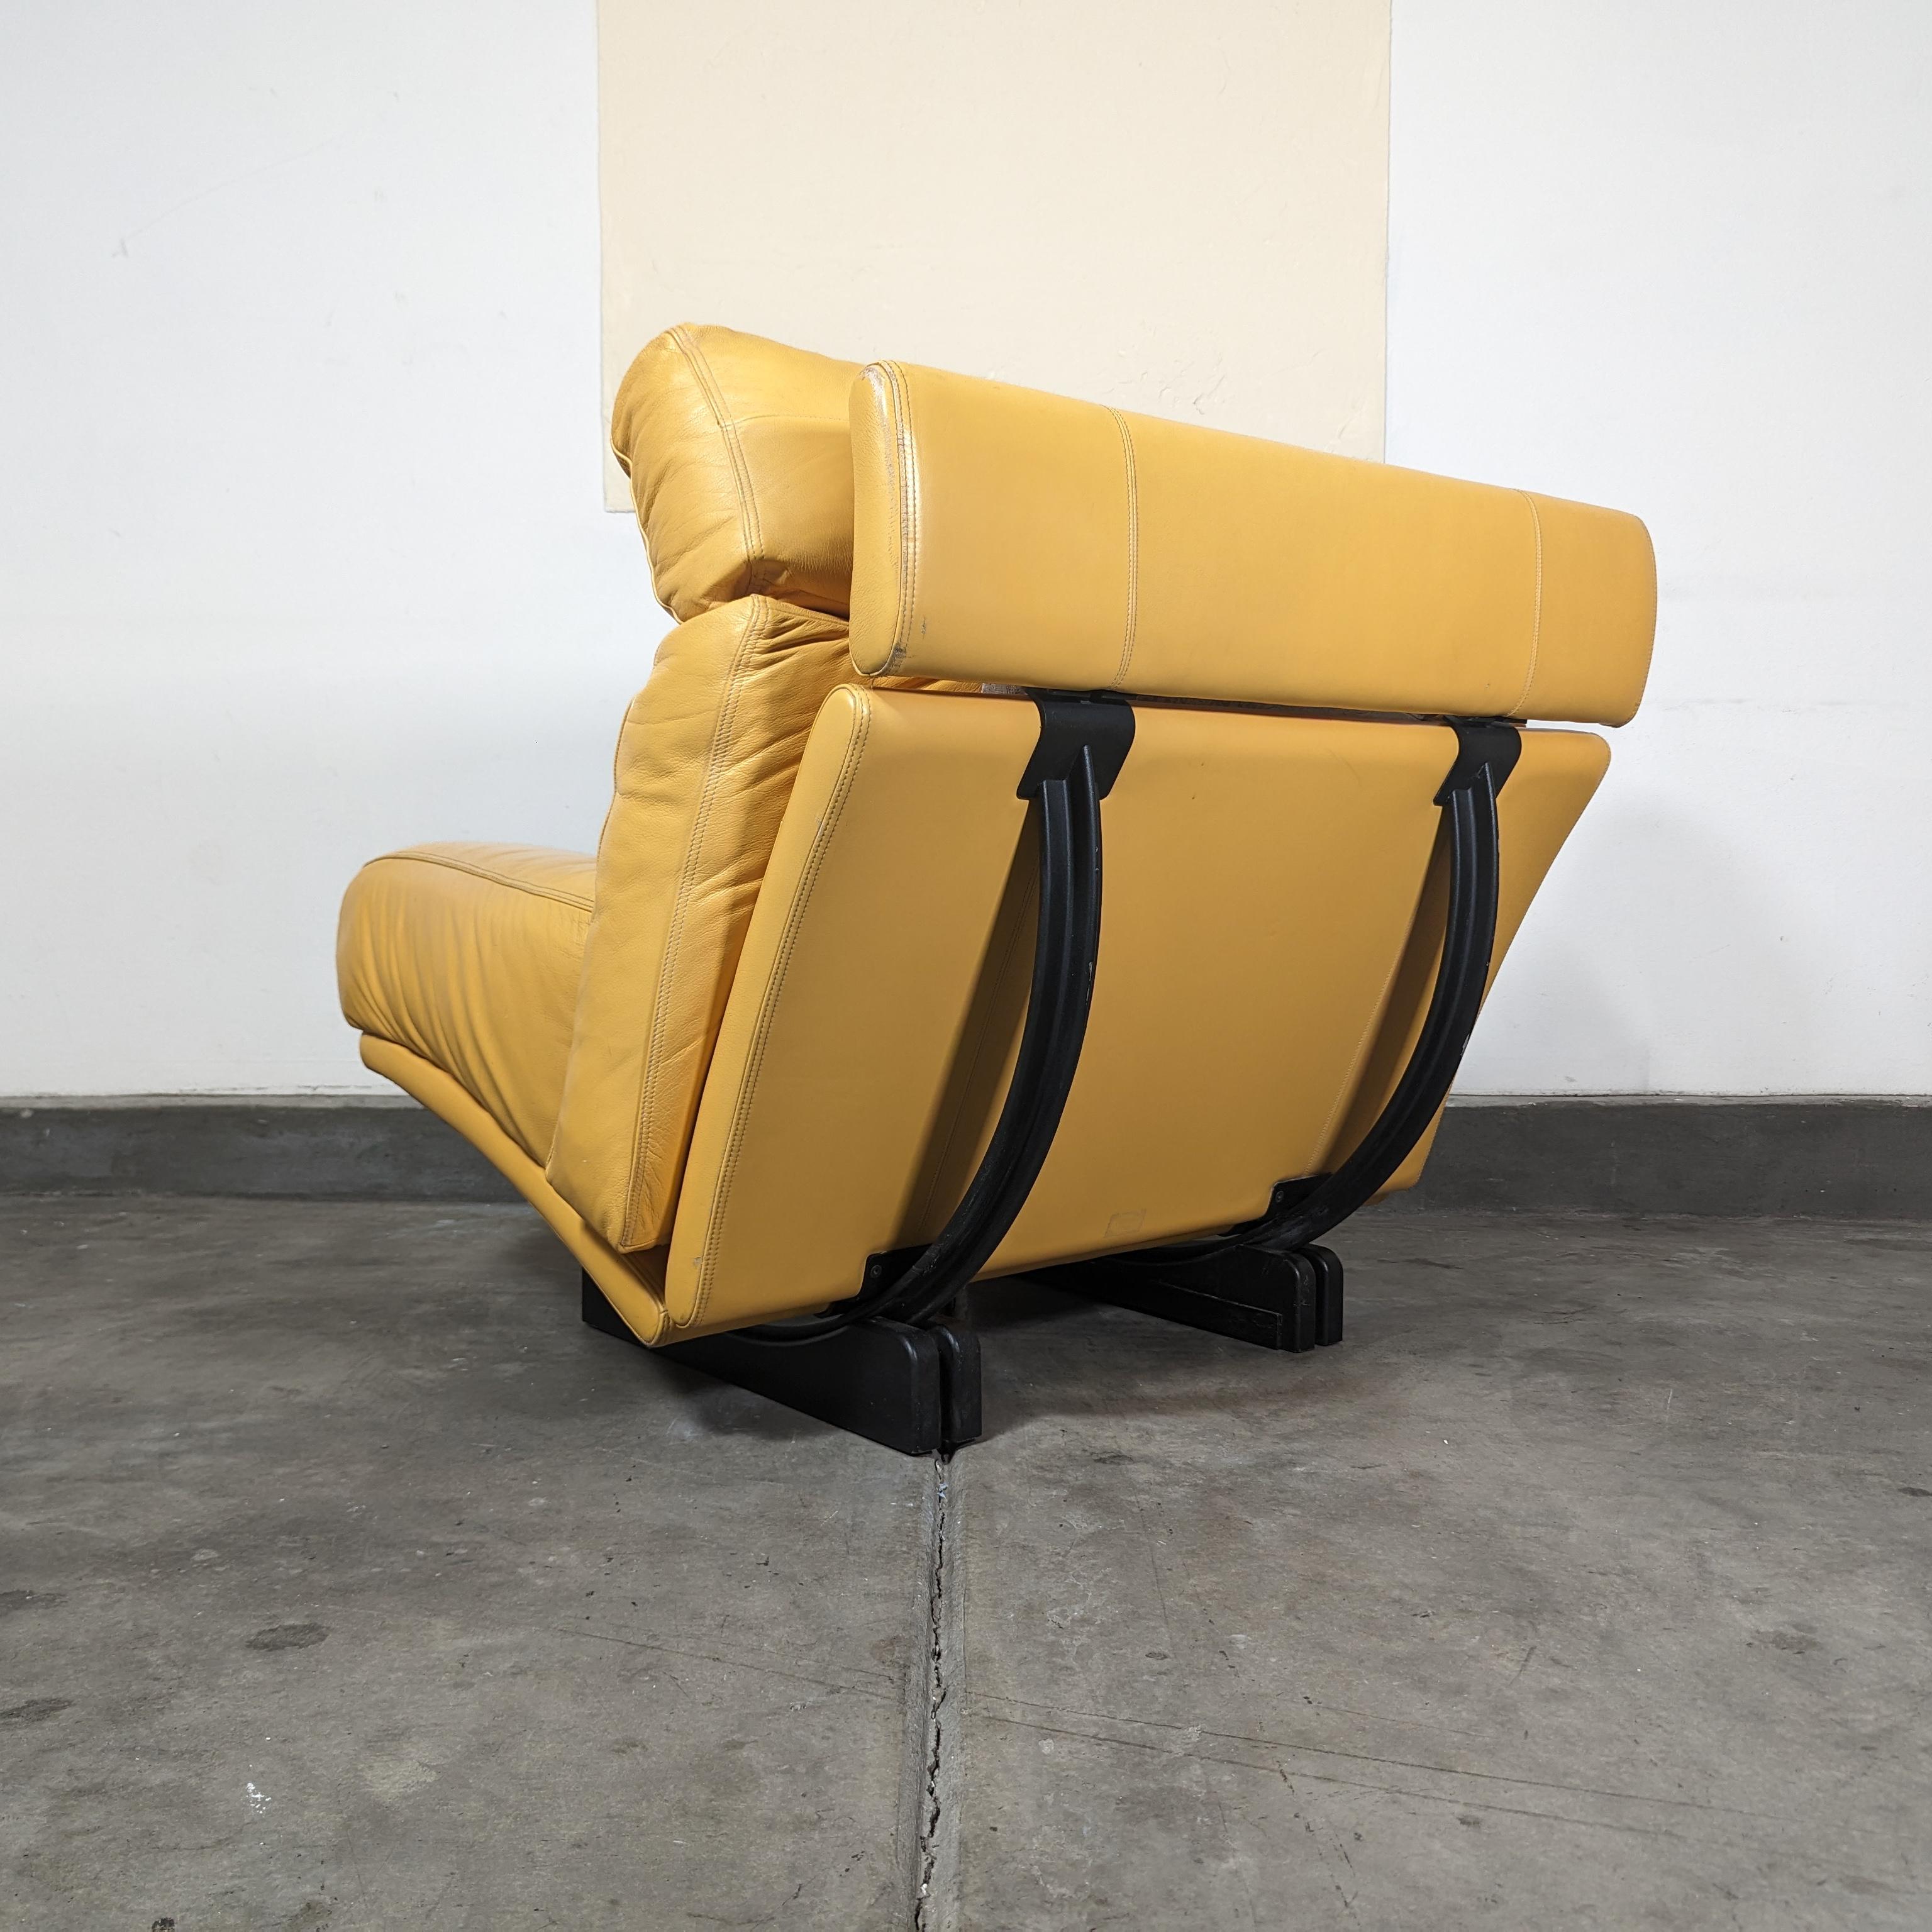 Postmodern Walse Leather Lounge Chair by Tito Agnoli for Poltrona Frau, c1990s For Sale 6